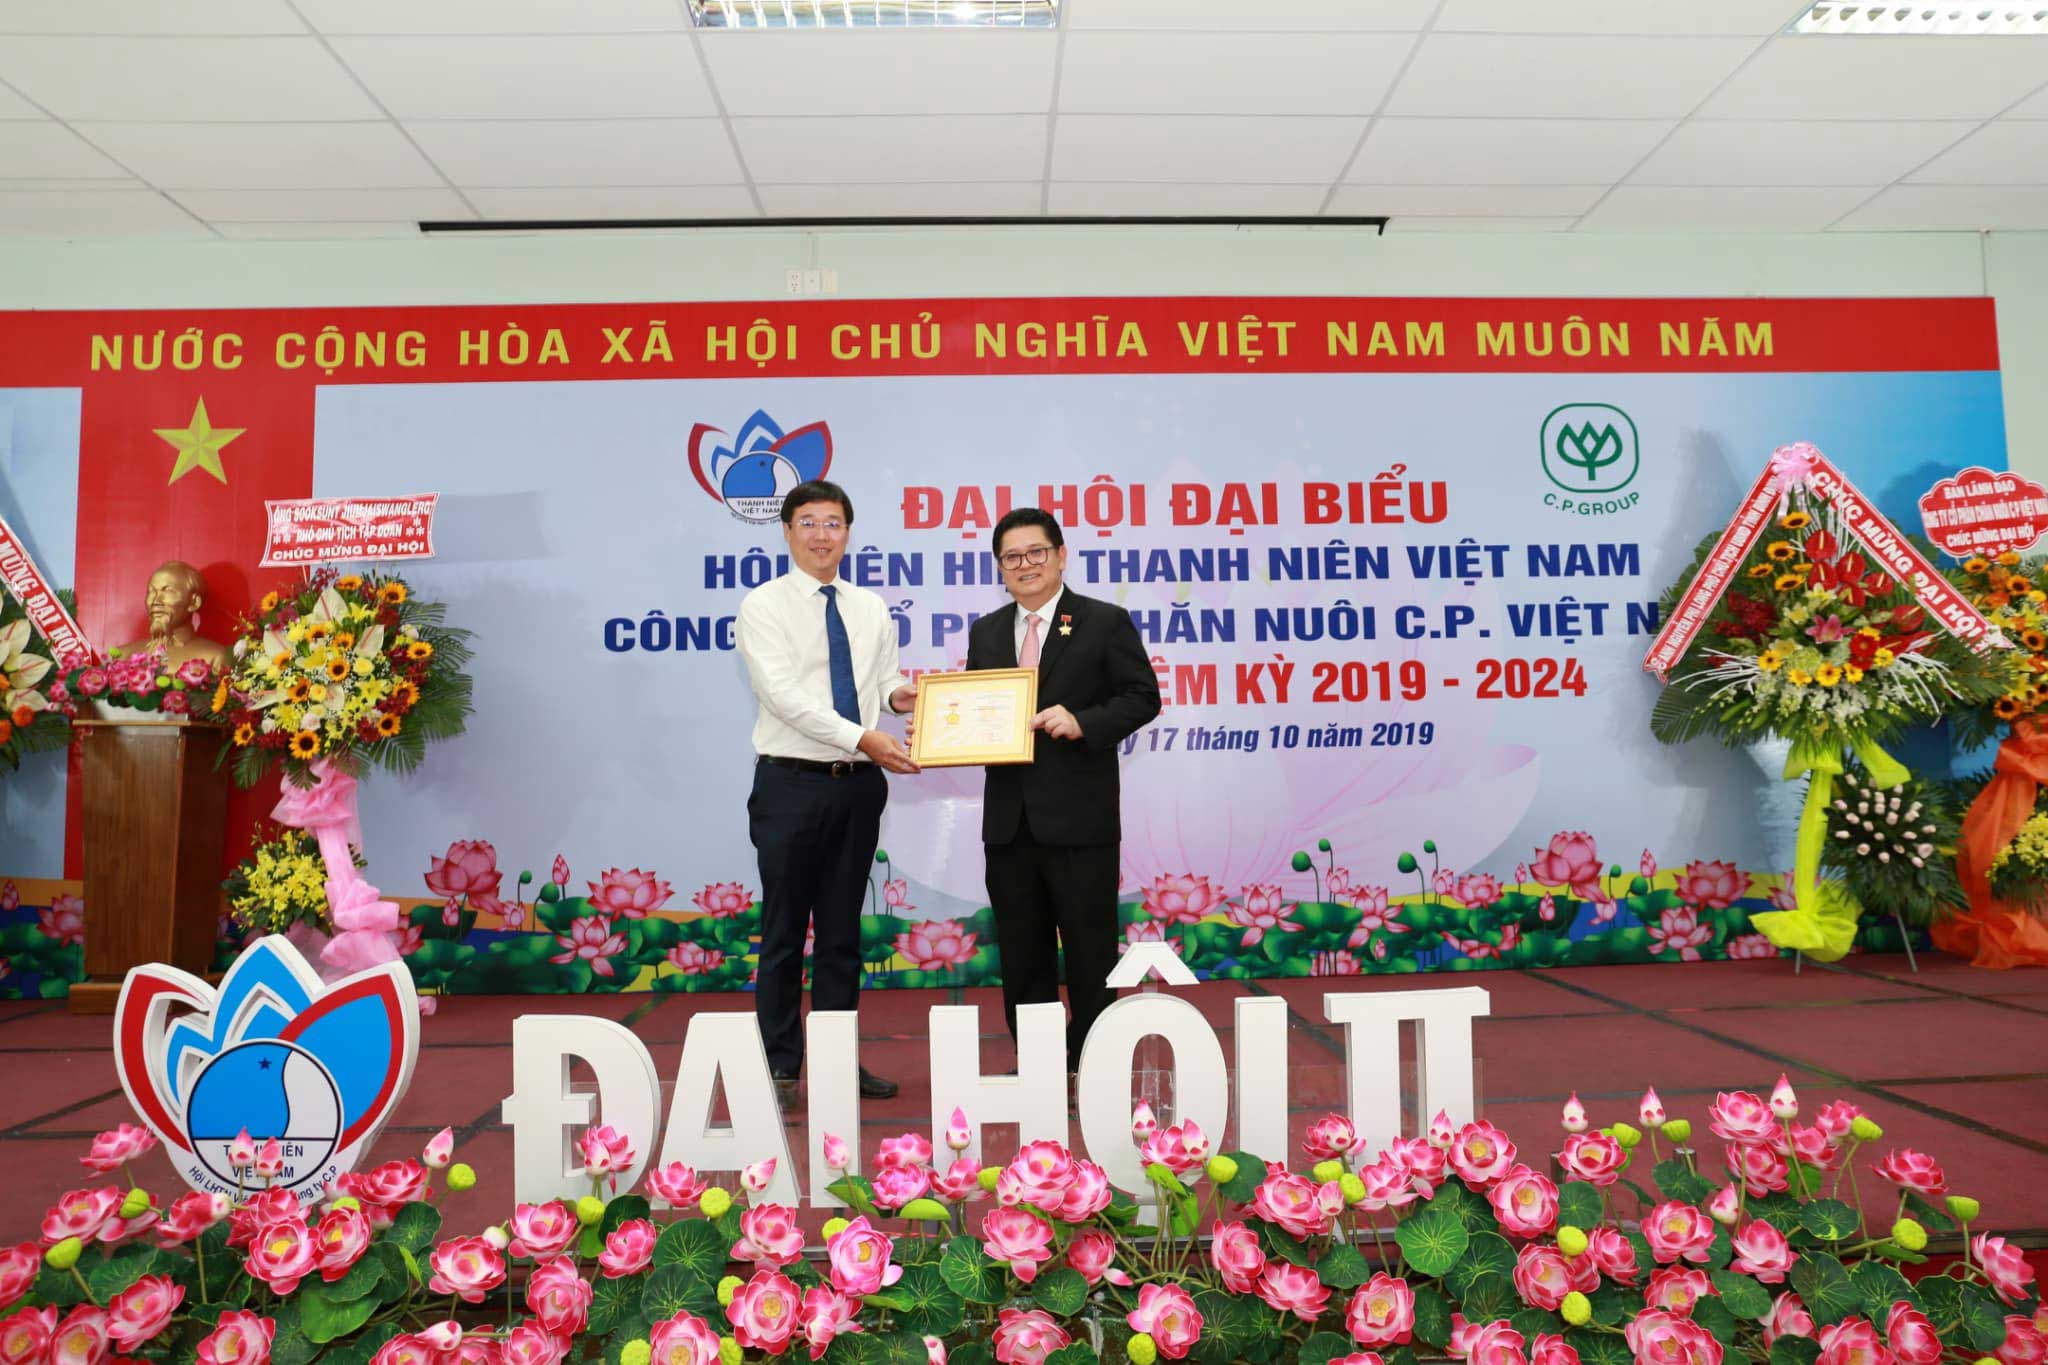 President of CP Vietnam awarded Youth Service Medal of Honor.